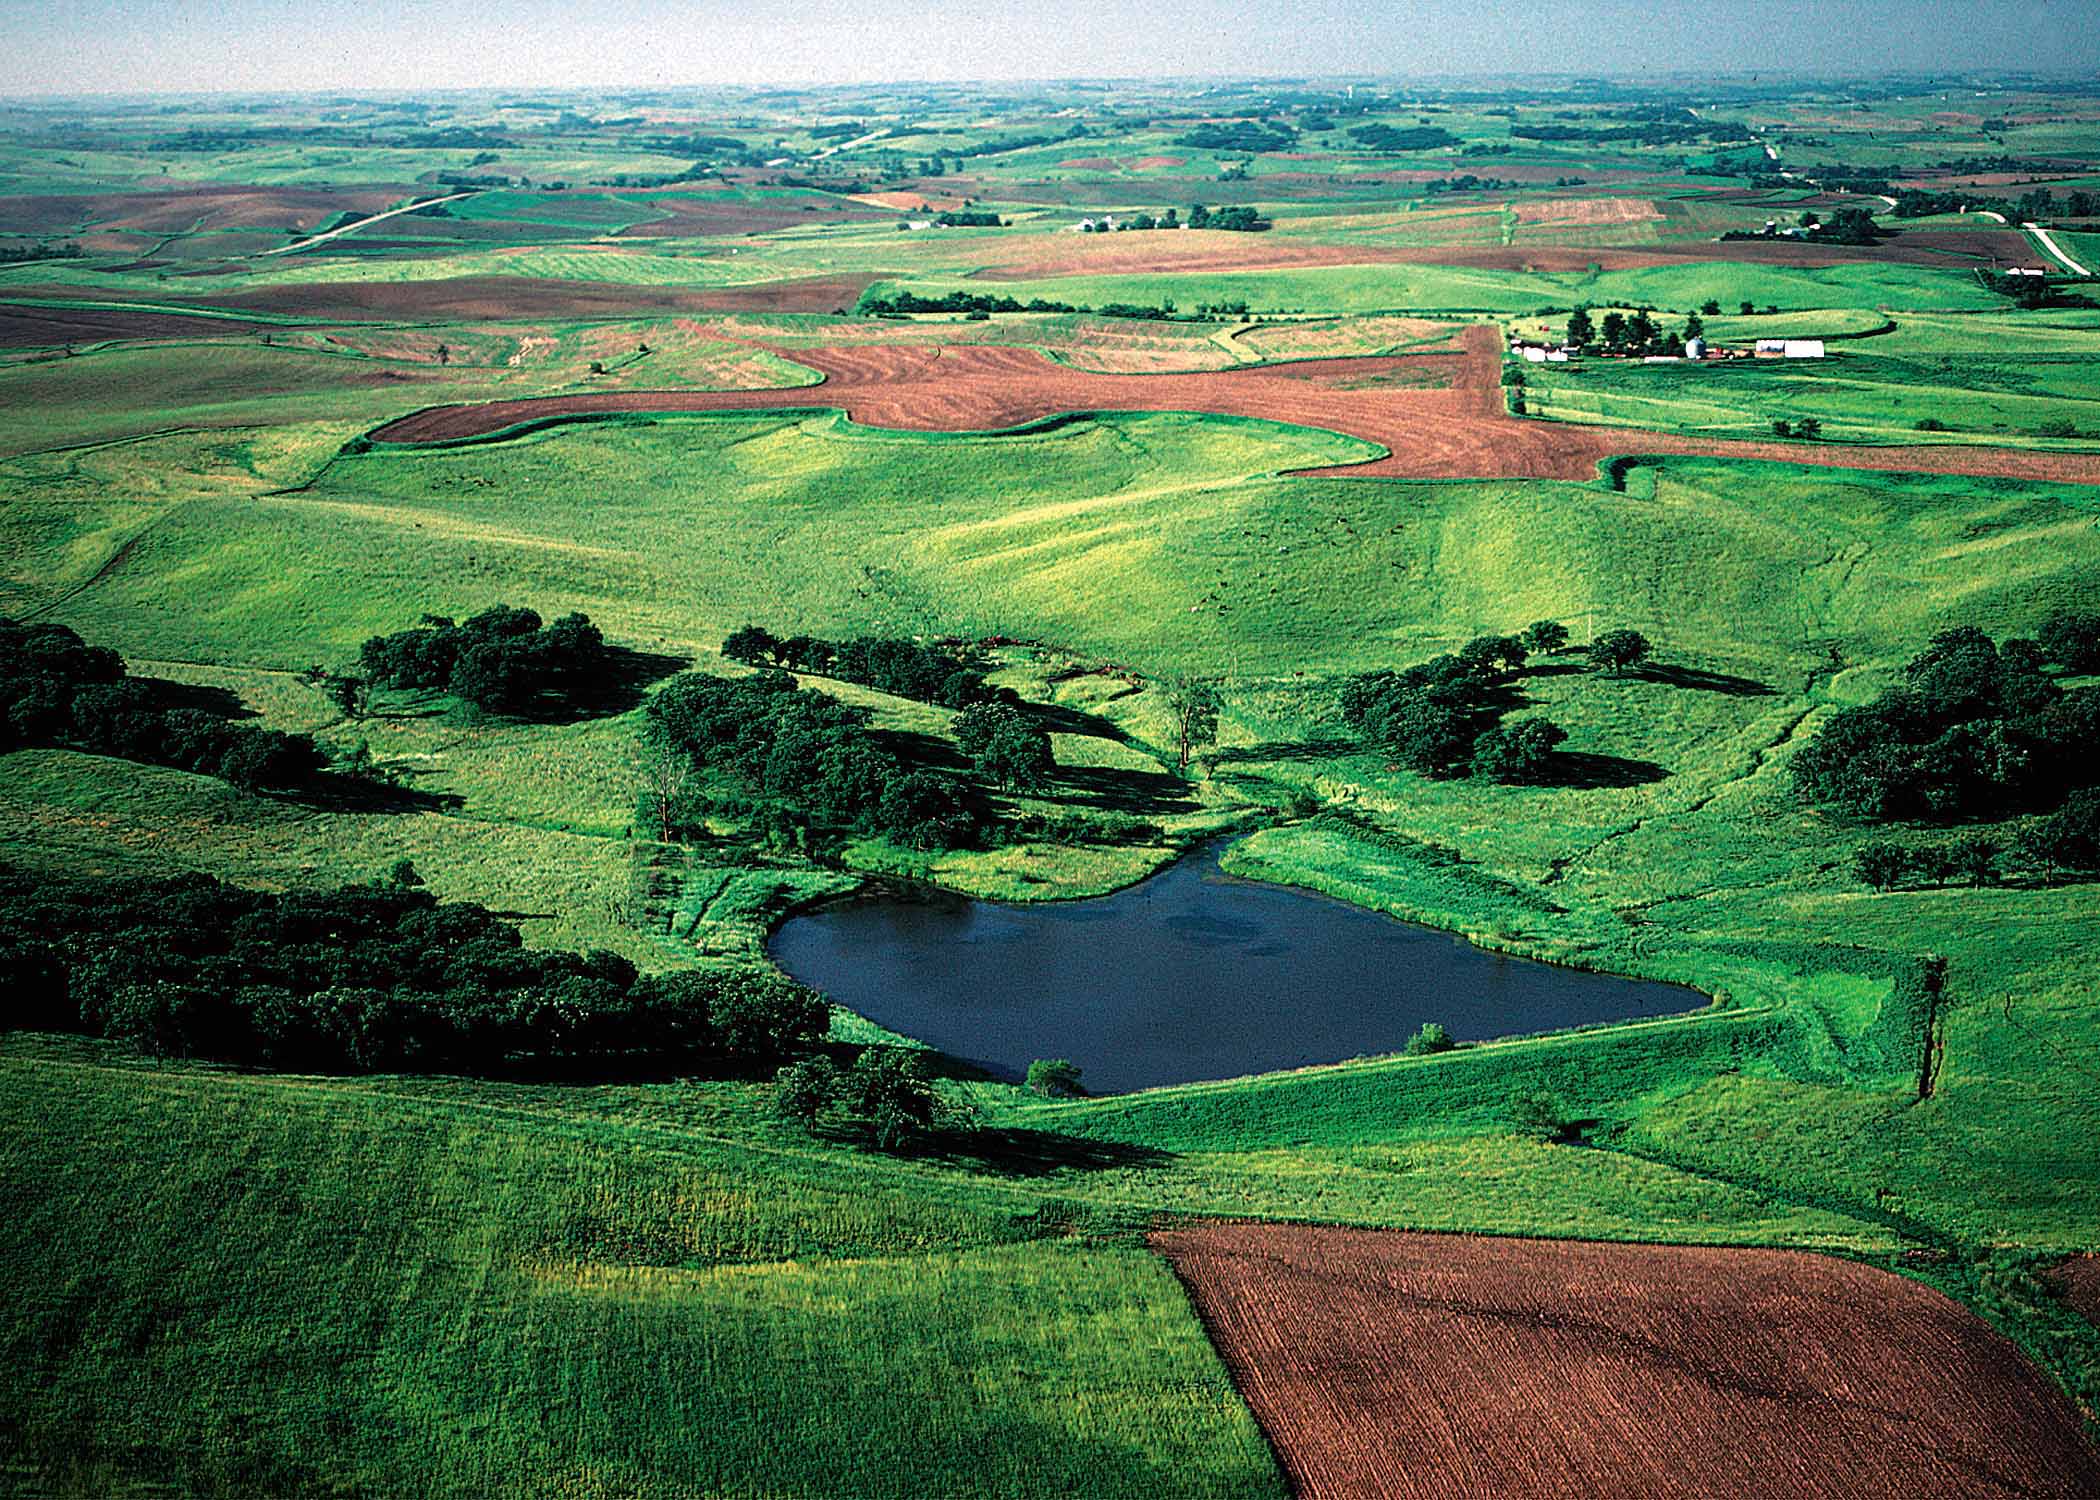 Photograph of a watershed